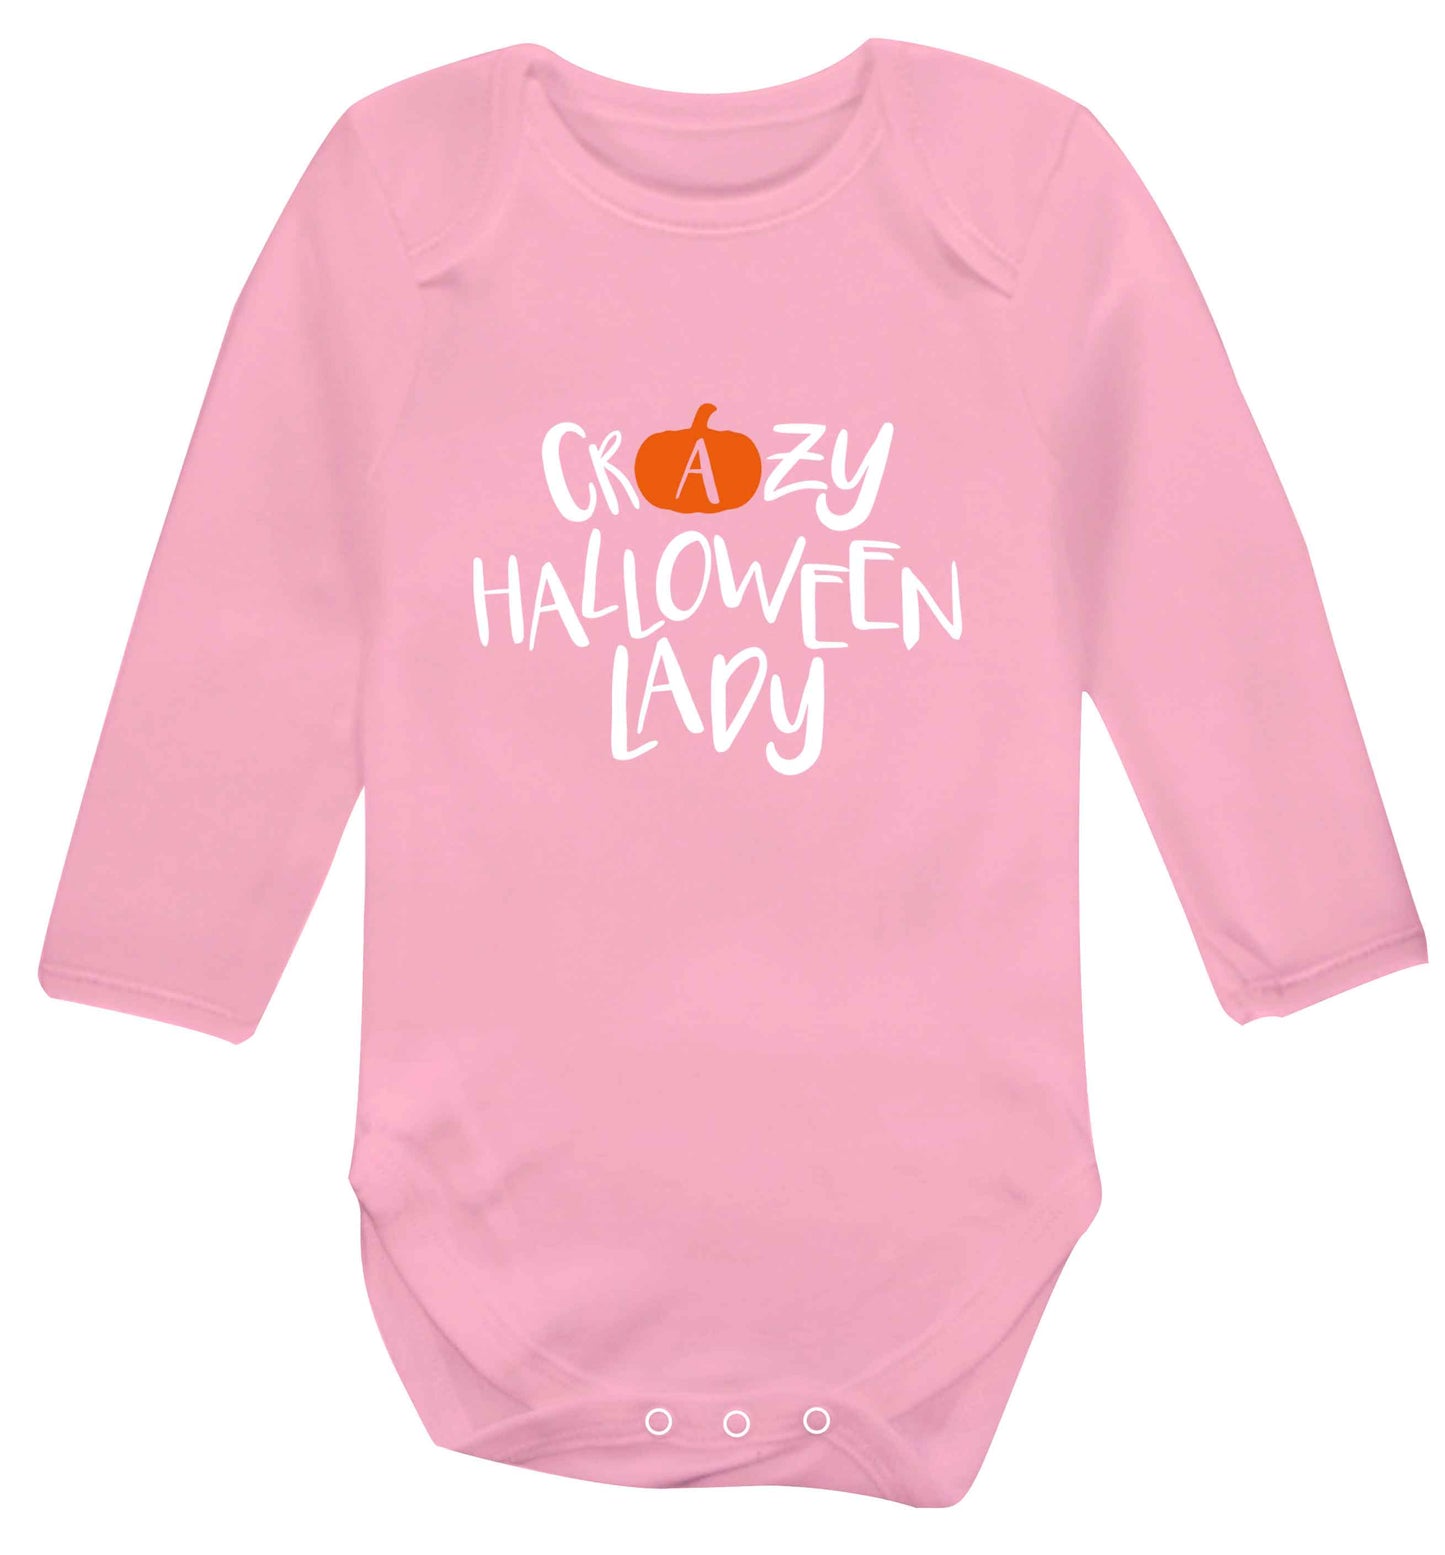 Crazy halloween lady baby vest long sleeved pale pink 6-12 months